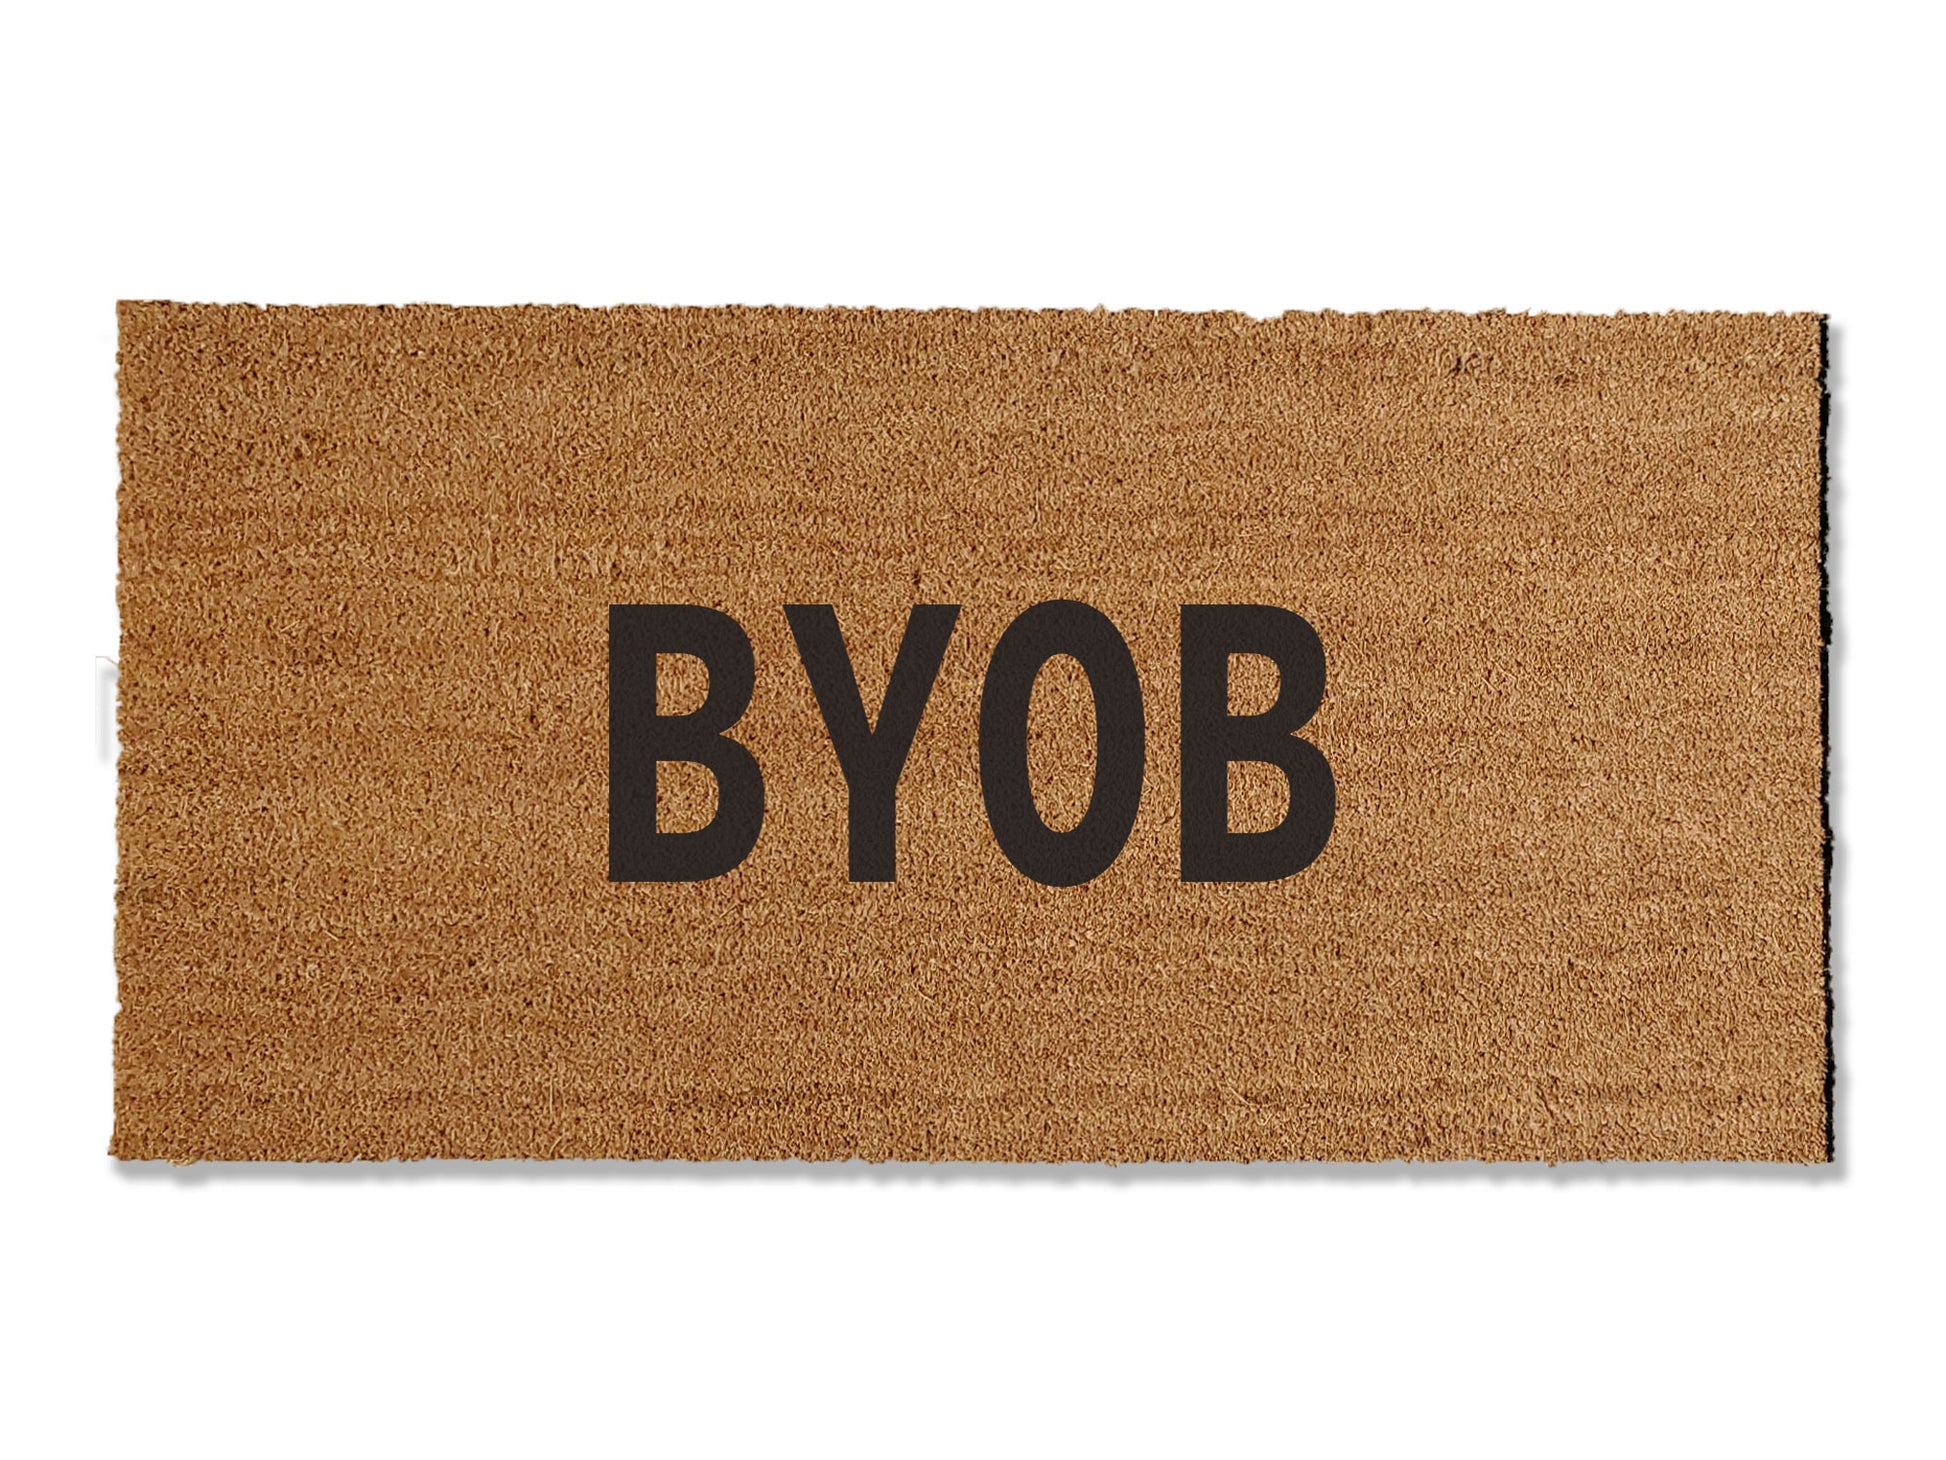 Custom 1/2 inch thick coir doormat with a playful 'BYOB' design, perfect for football season. This personalized mat adds a touch of fun to your entryway while efficiently trapping dirt, making it a stylish and functional choice for welcoming guests during the sports season.